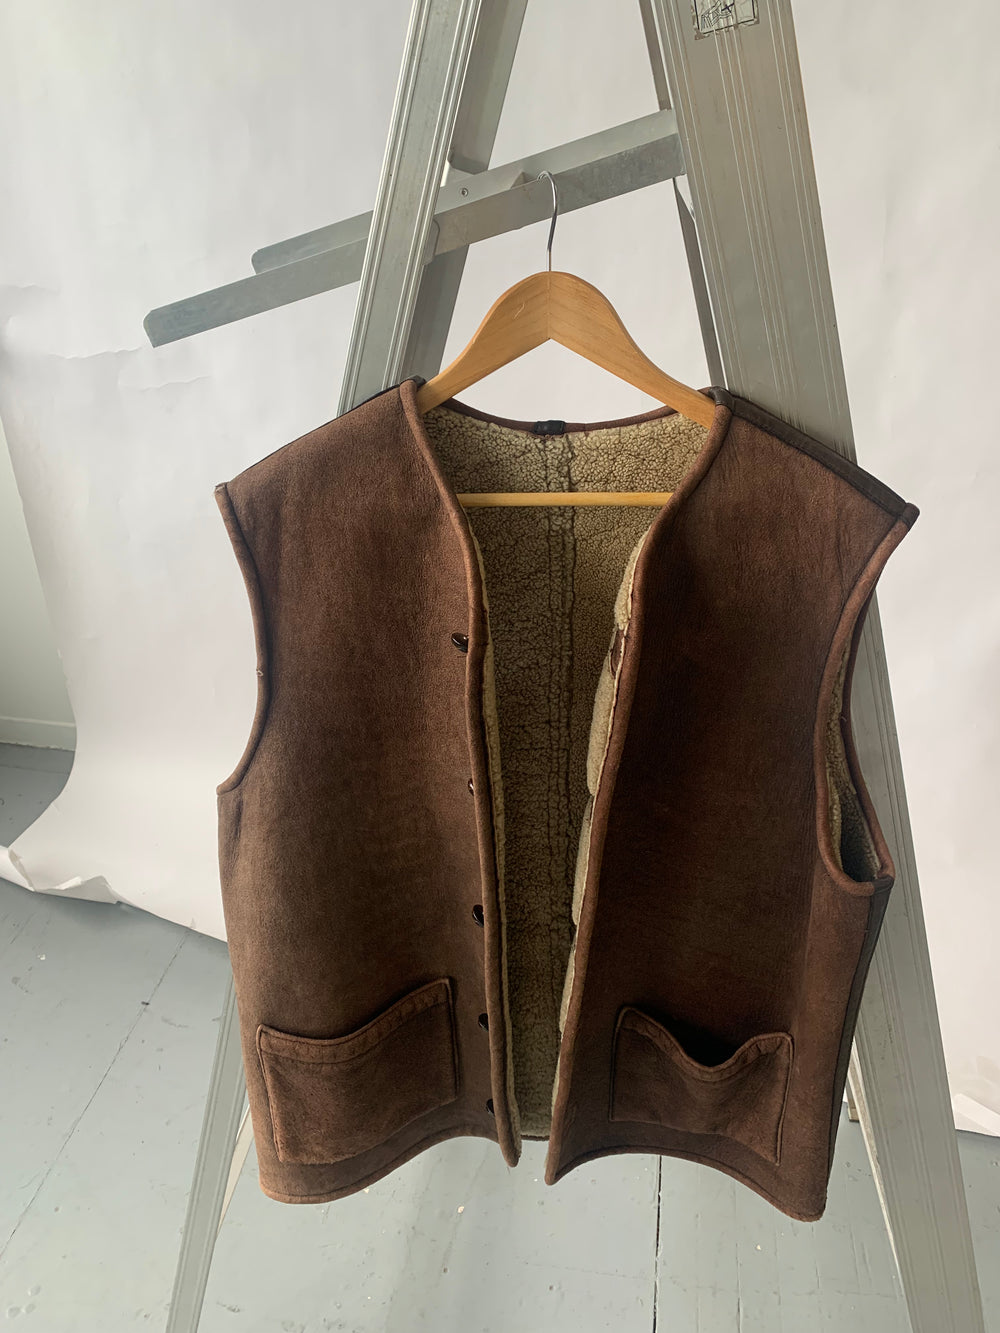 LUXURY CONSIGNMENT - Holt Renfrew Chocolate Shearling Vest